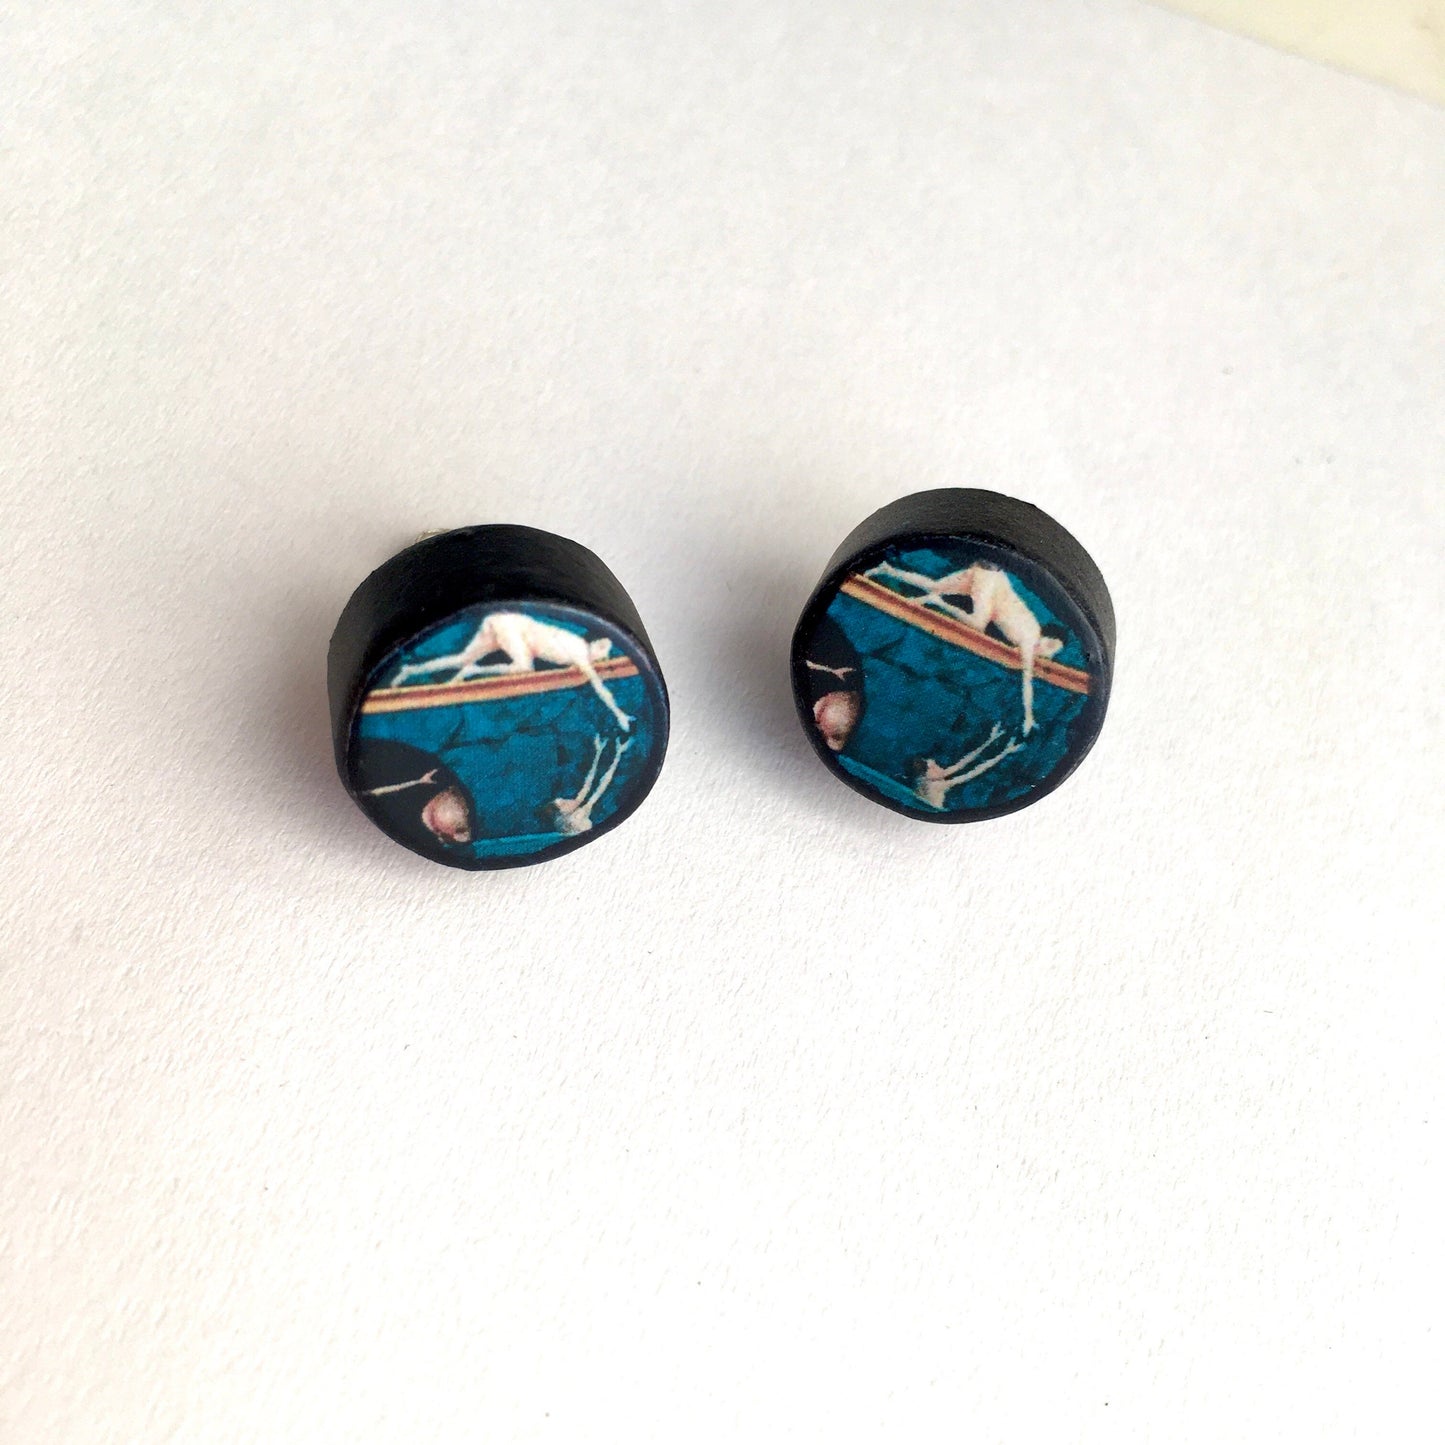 Hieronymus Bosch art stud earrings. These earrings are professionally handmade with sustainable wood and sterling silver back push stud earrings. These artsy earrings are unisex and cool.